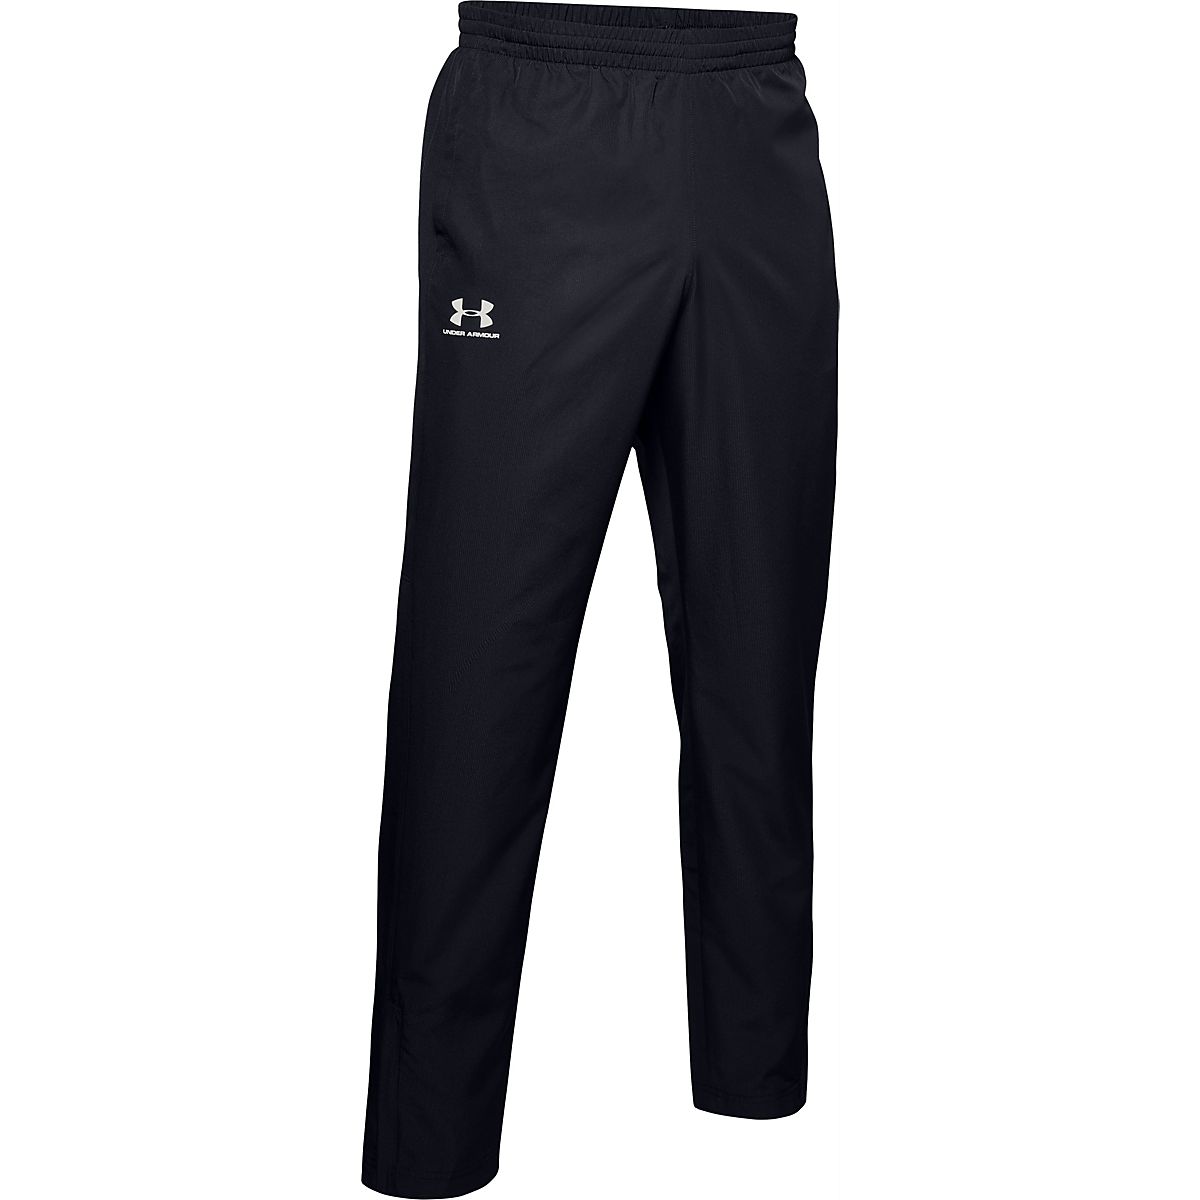 Under Armour Mens Heatgear Mesh Lined Blue Loose Workout Athletic Pants -  Small 